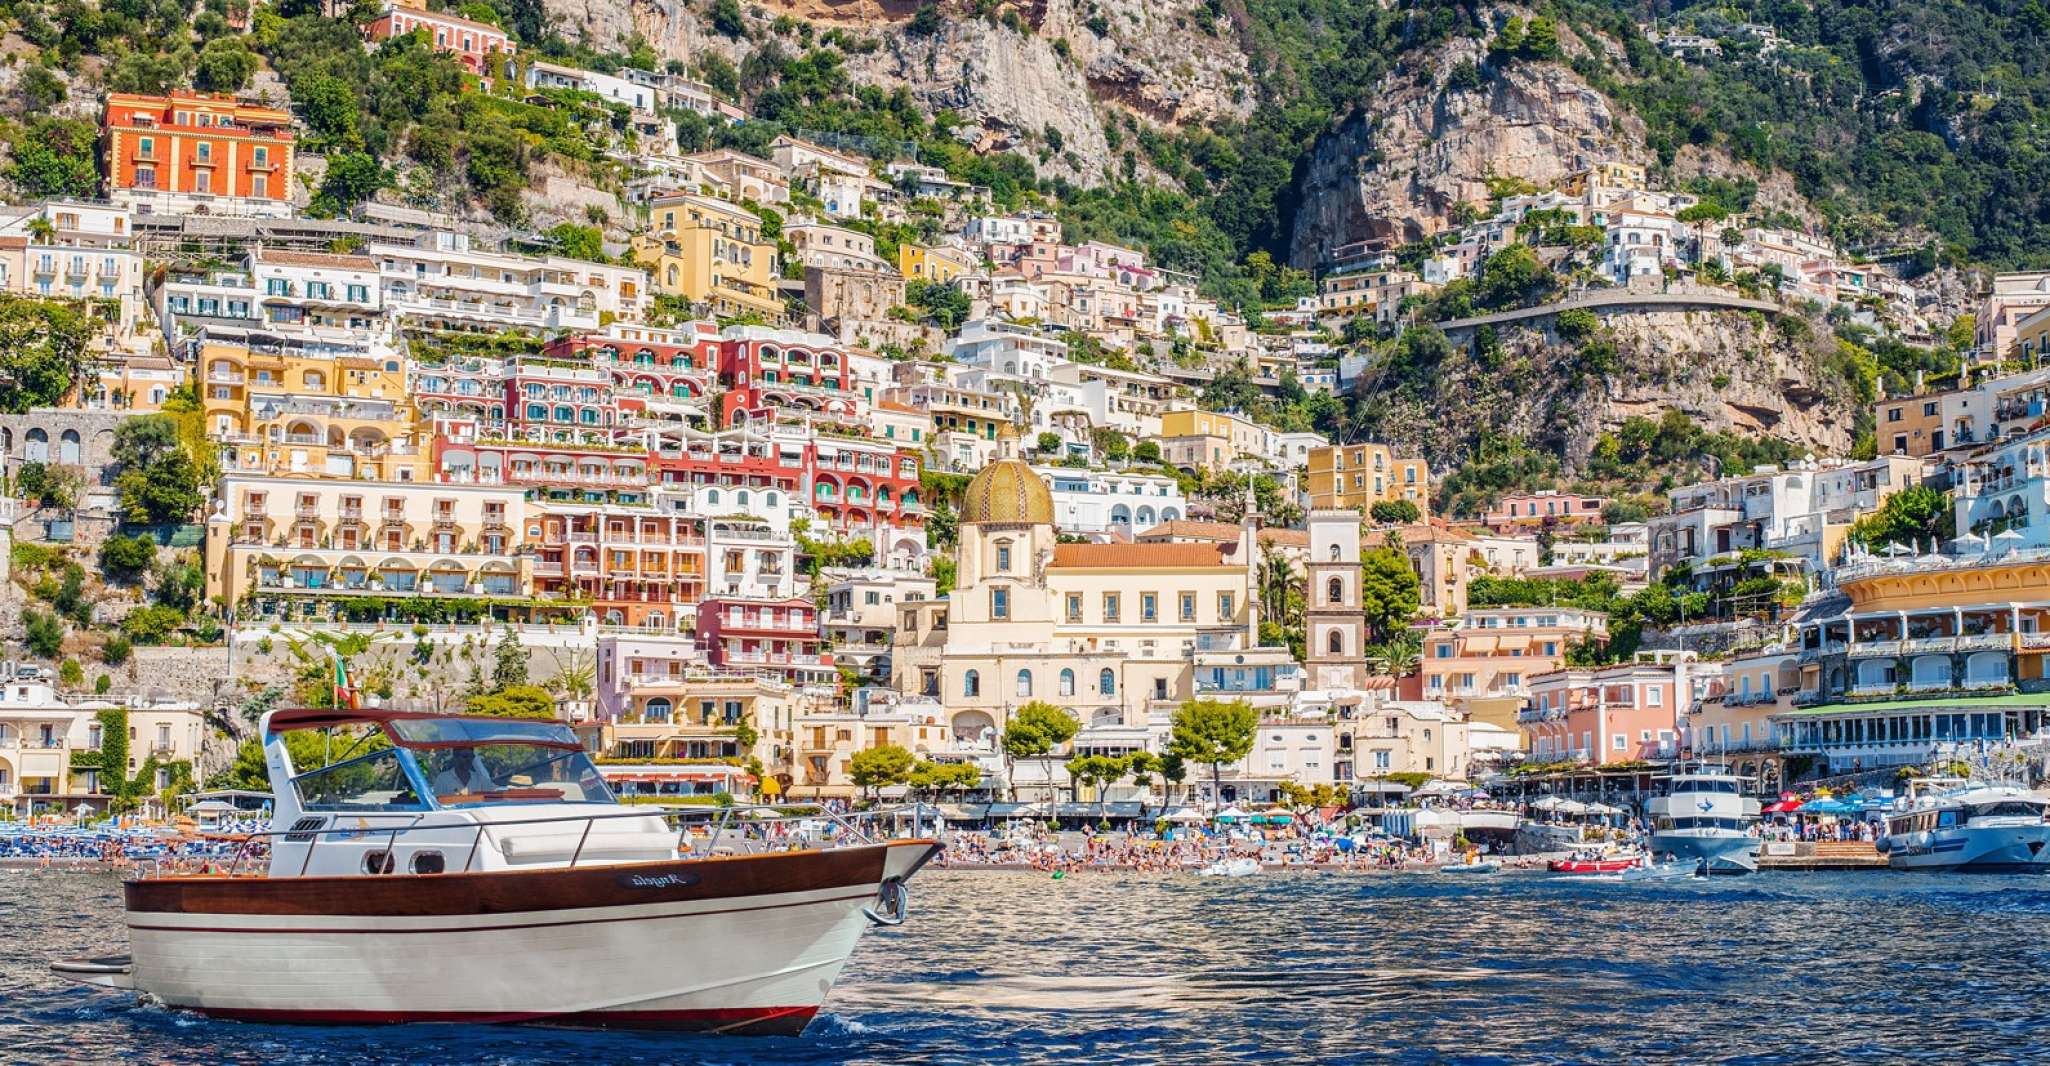 From Sorrento, Positano and Amalfi Boat Trip with Transfer - Housity